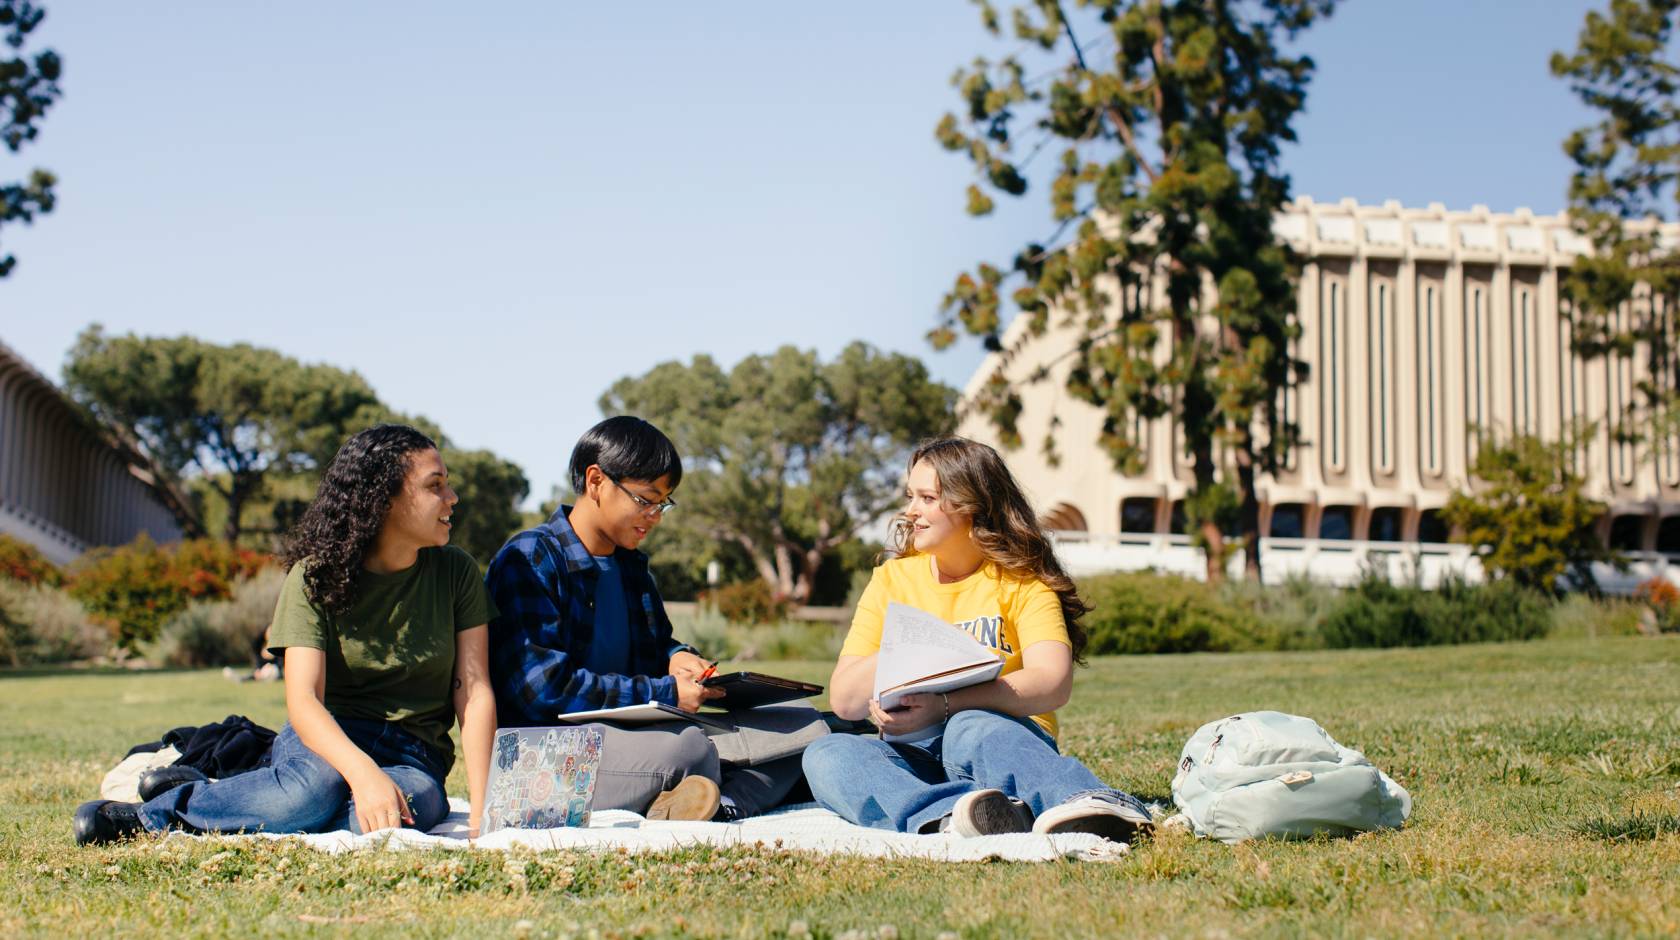 Three students study together on a blanket on the lawn of the UC Irvine campus, tall trees and buildings visible in the background